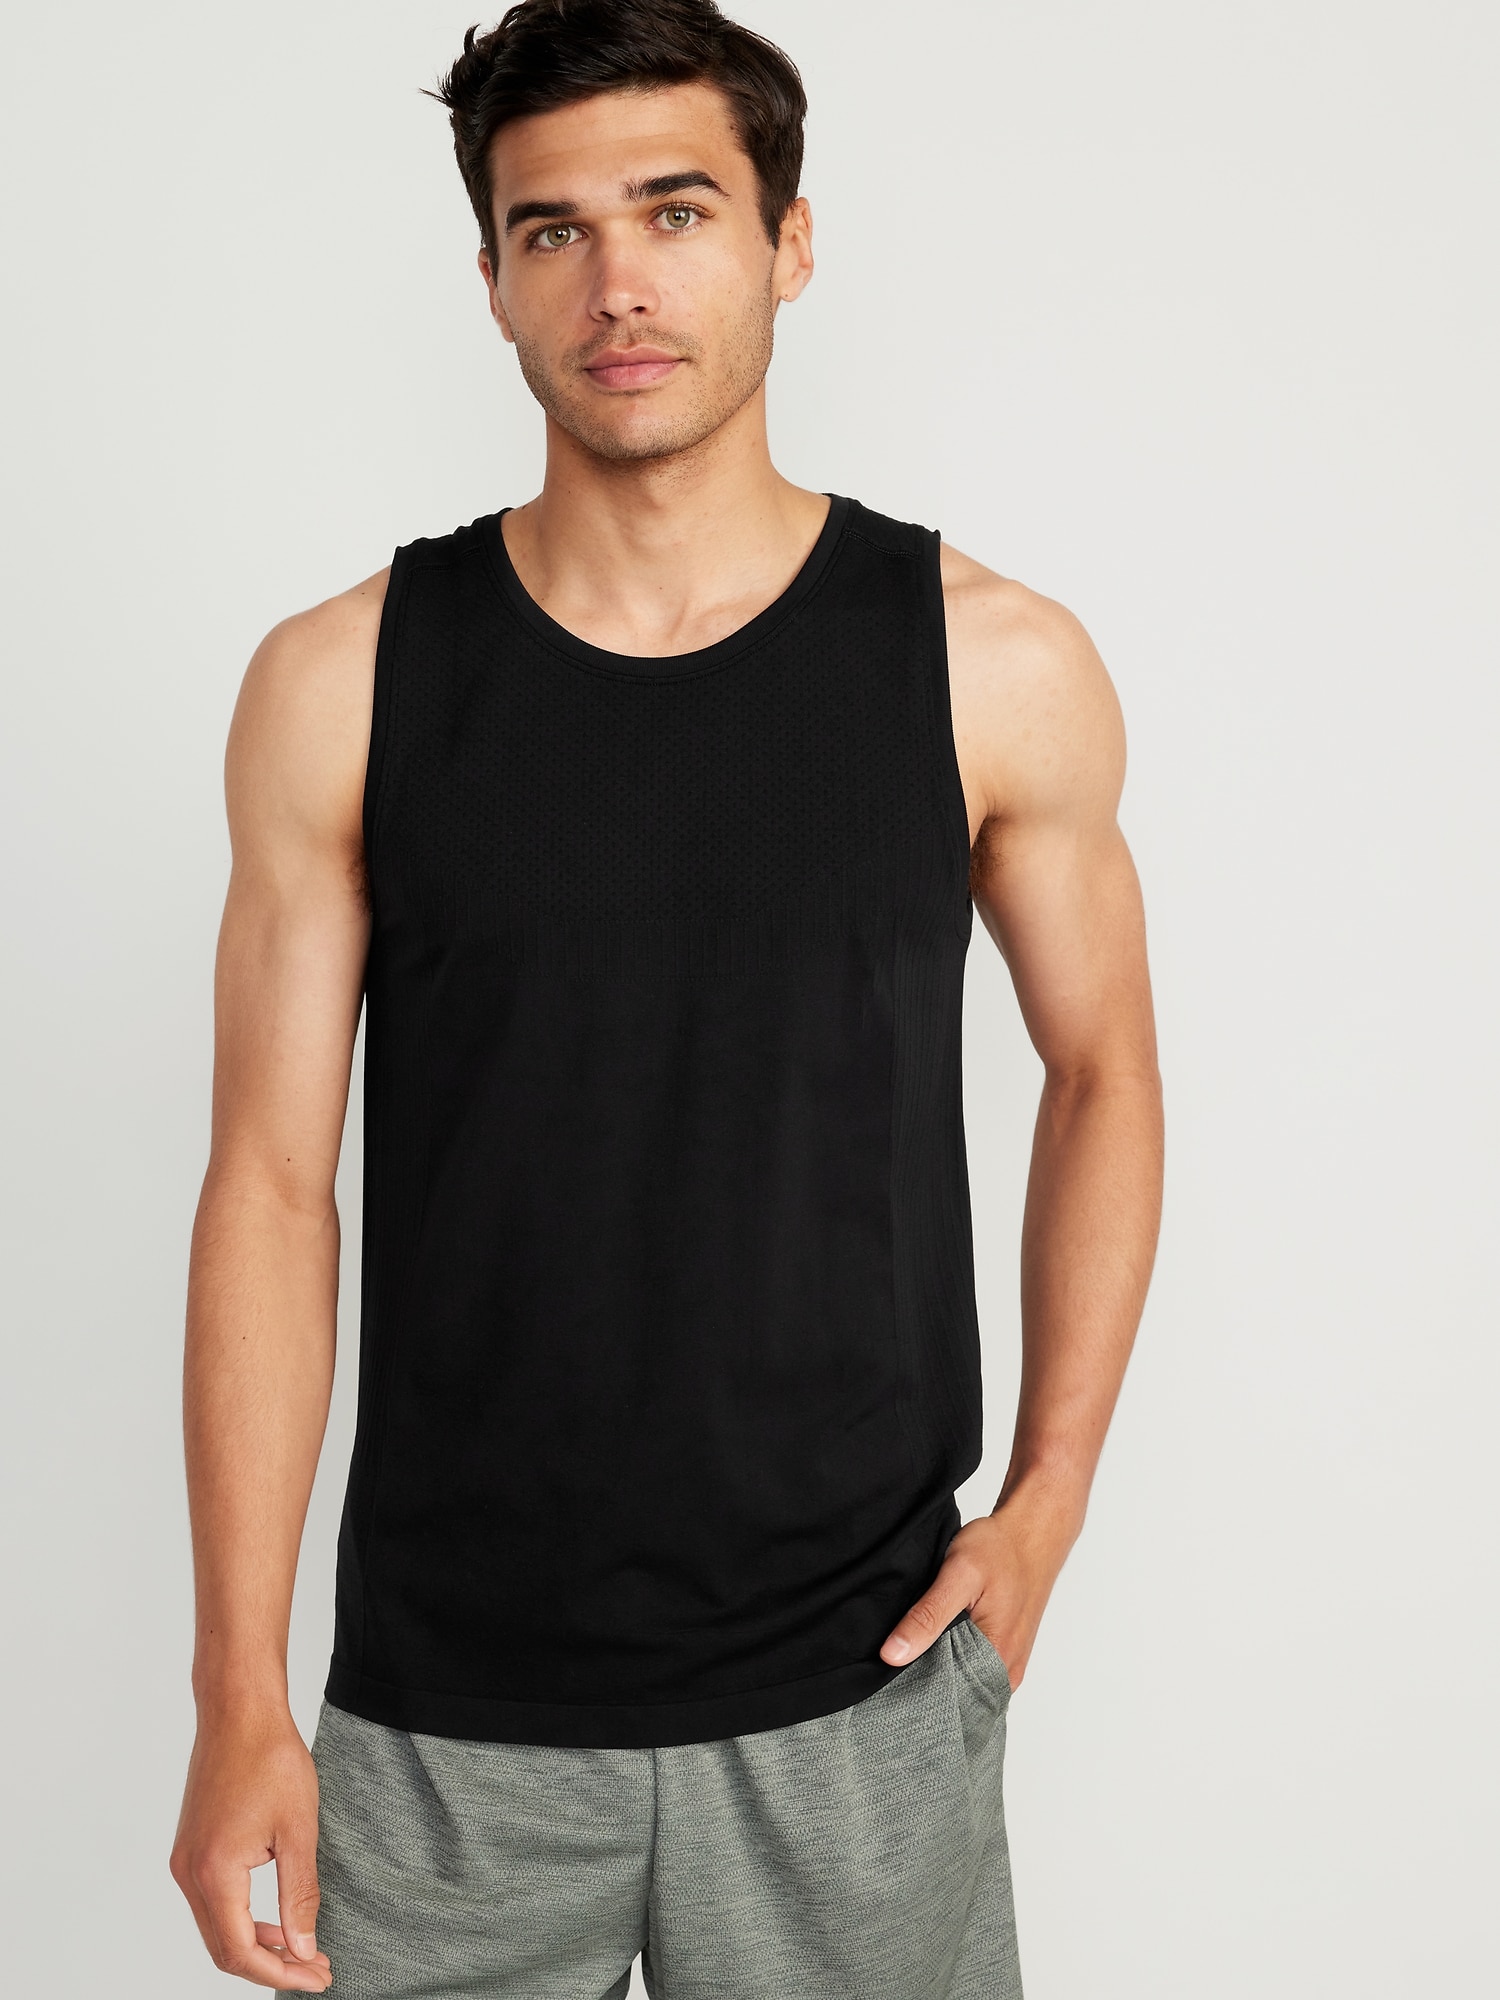 Smooth Tank Tops